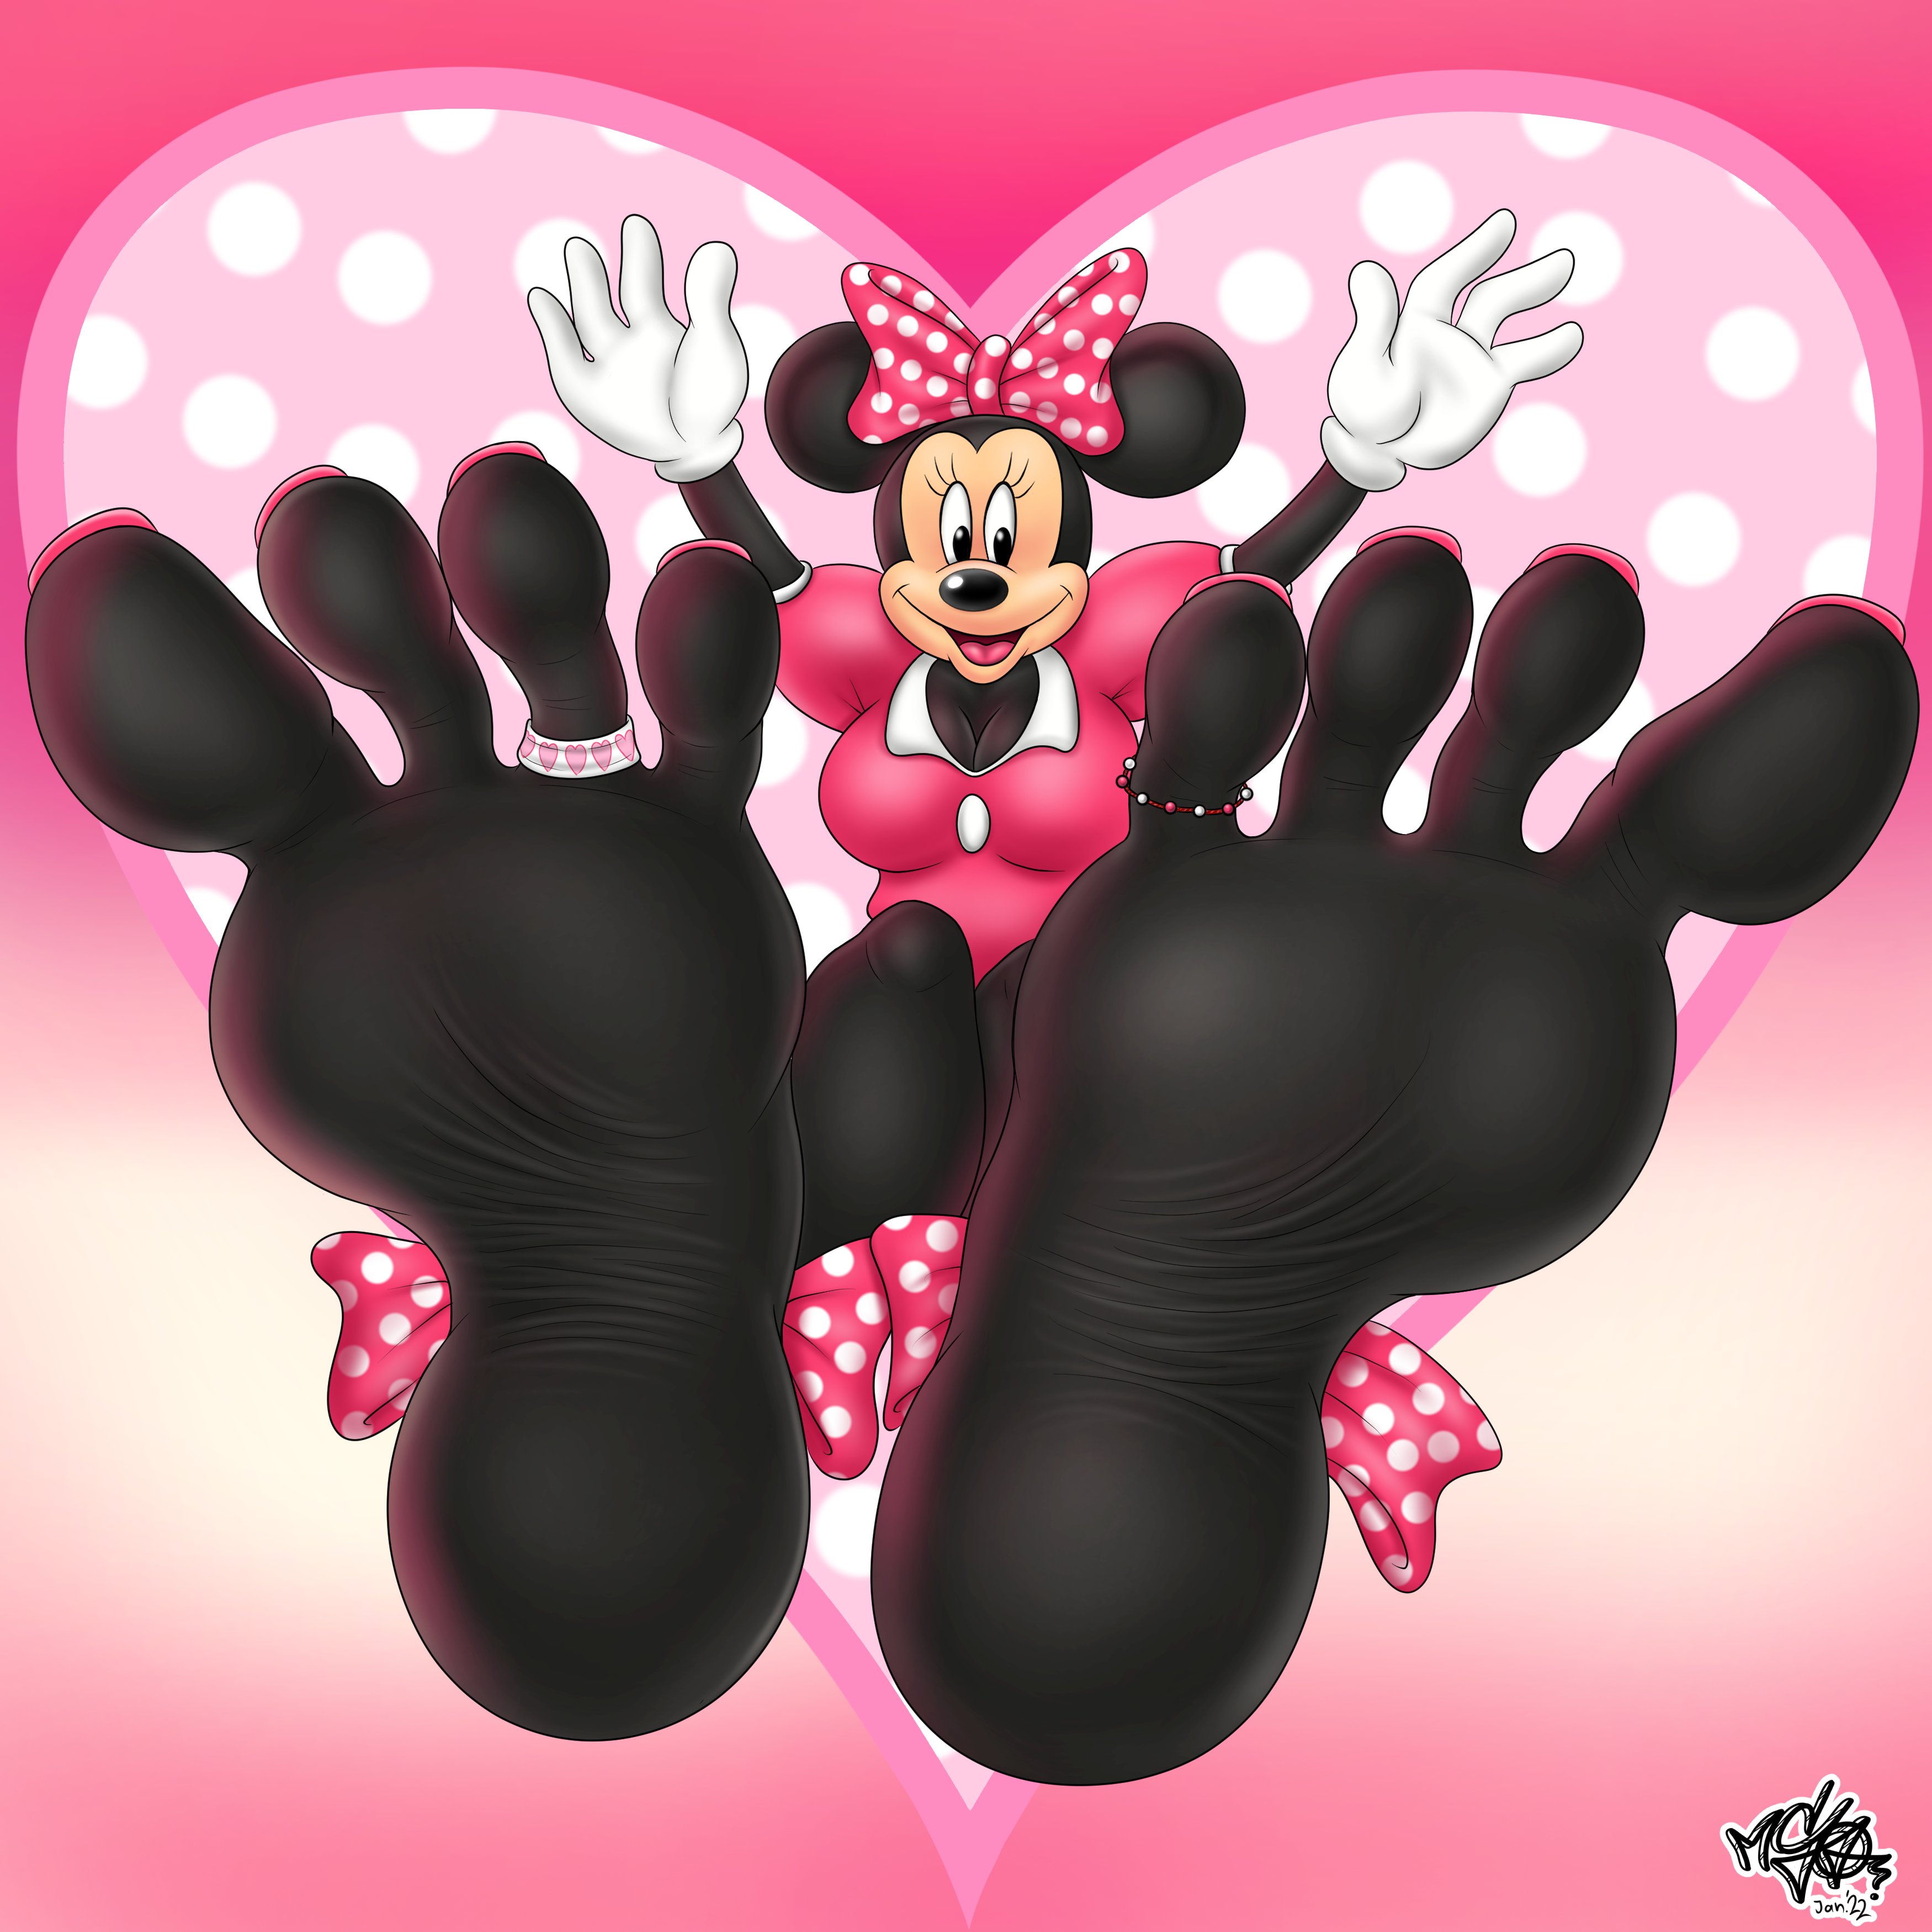 cerrar Regeneración cigarrillo Lowbo.art na Twitterze: „Hello, everybody! My girlfriend made me paint this  picture because she's a big fan of Minnie mouse. And here's the finished  work. #feet #foot #happy #sole #soles #toe #toes #